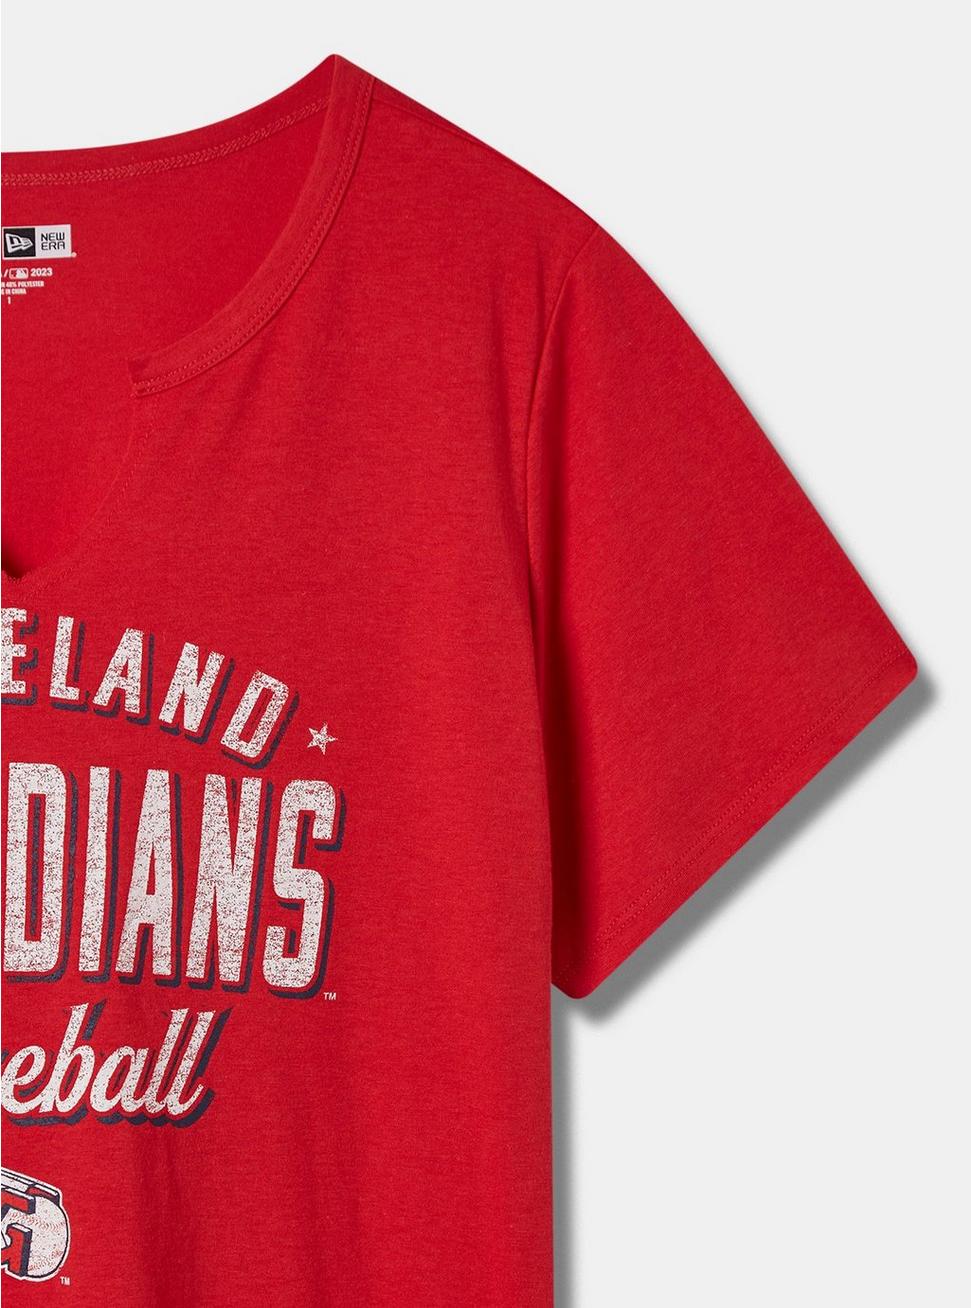 MLB Cleveland Guardians Classic Fit Cotton Notch Tee, JESTER RED, alternate